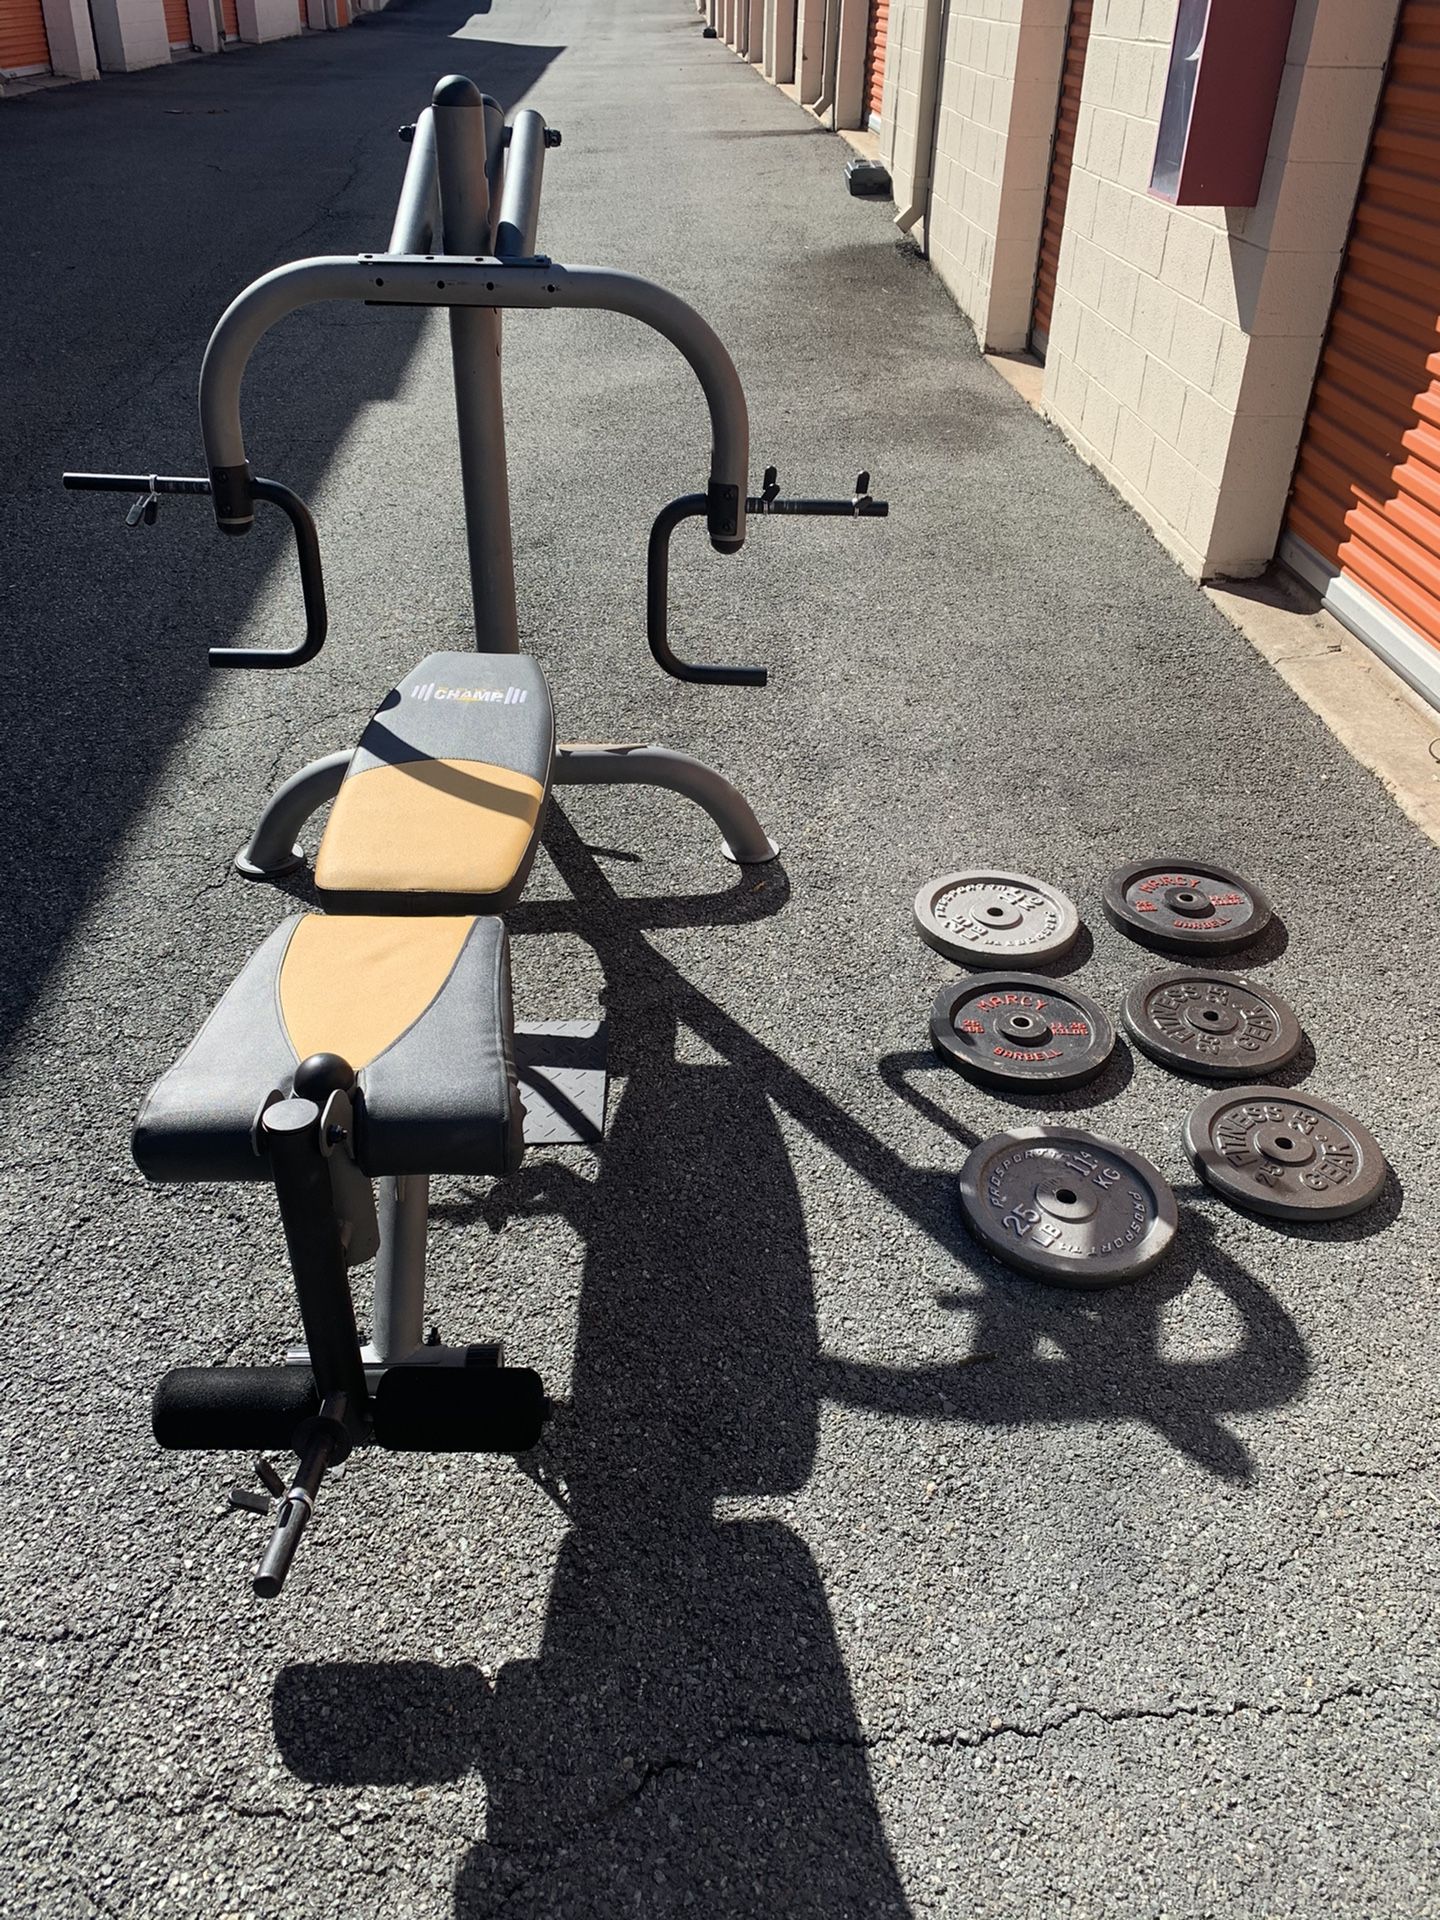 Body Champ Multi press with 150lbs of weight Excellent Condition!!